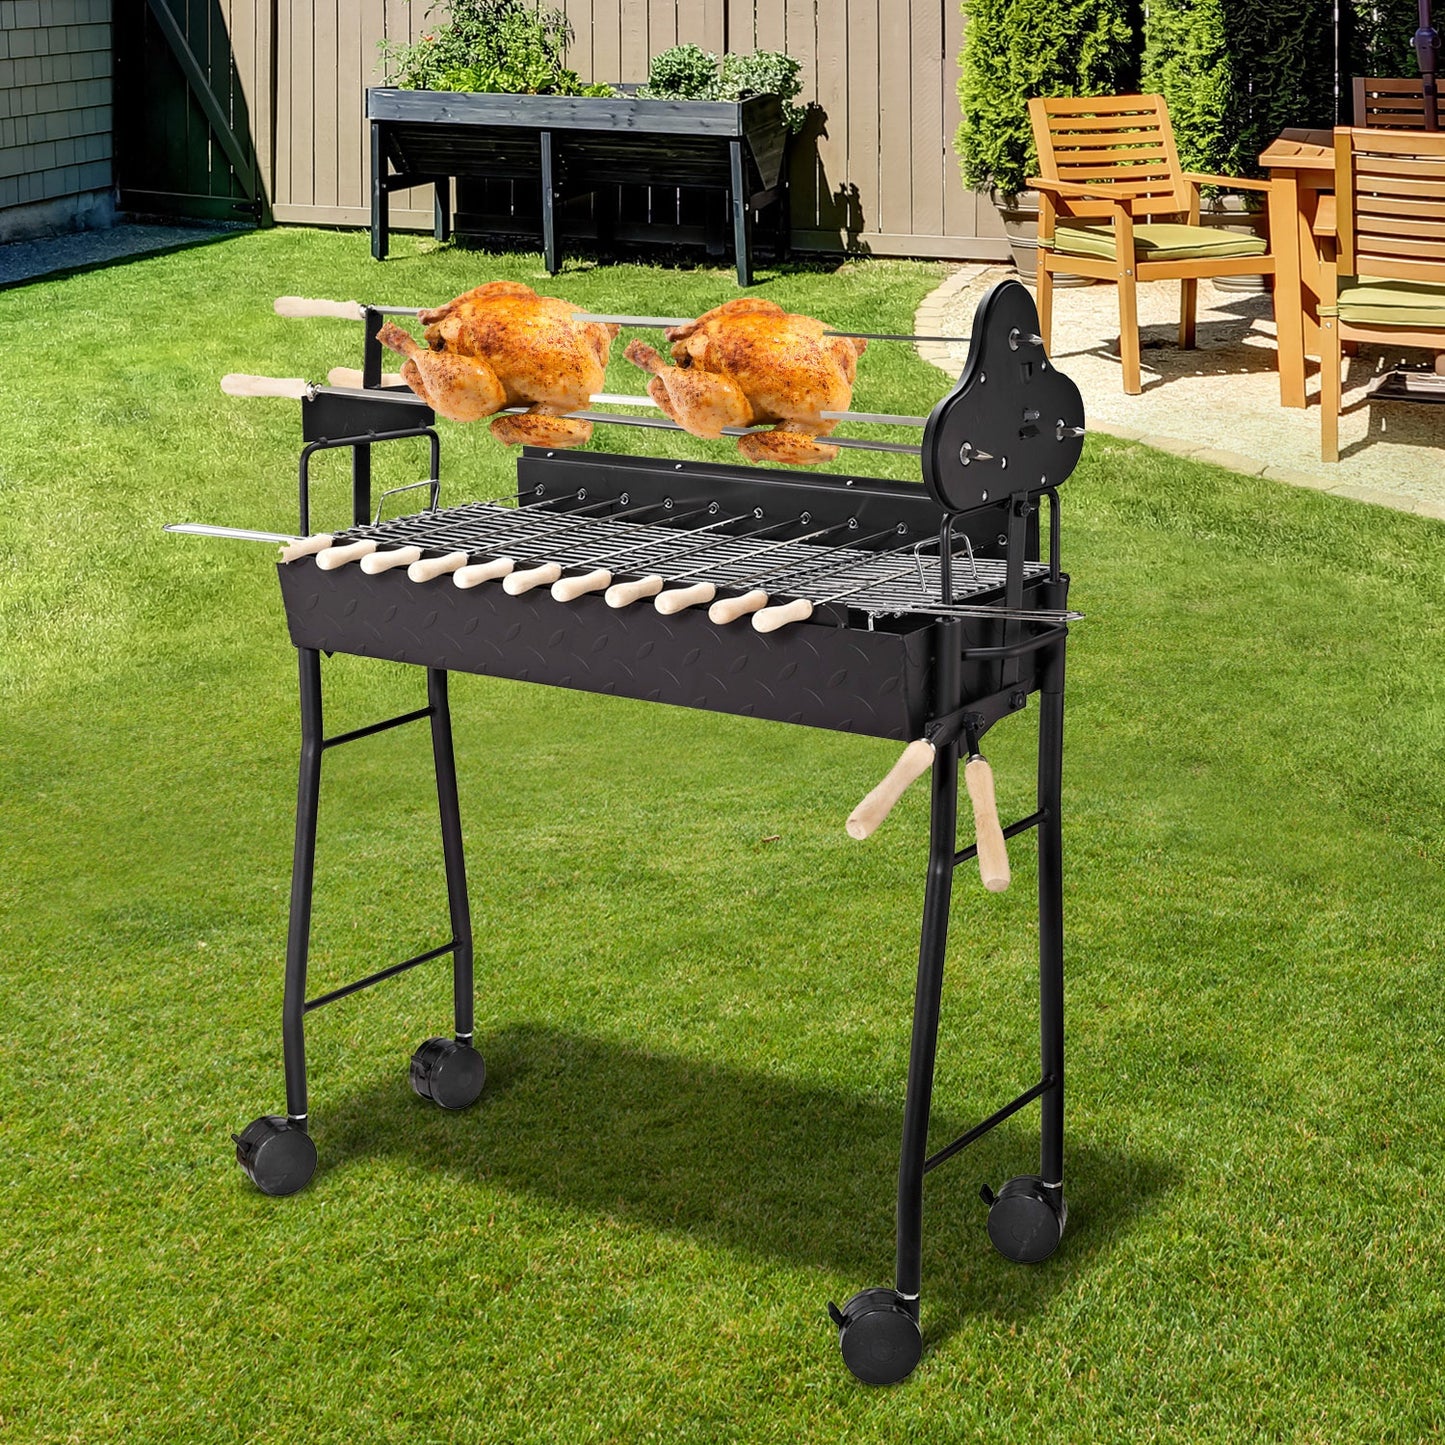 L'Chaim Outsunny Charcoal Trolley BBQ Garden Outdoor Barbecue Cooking Grill